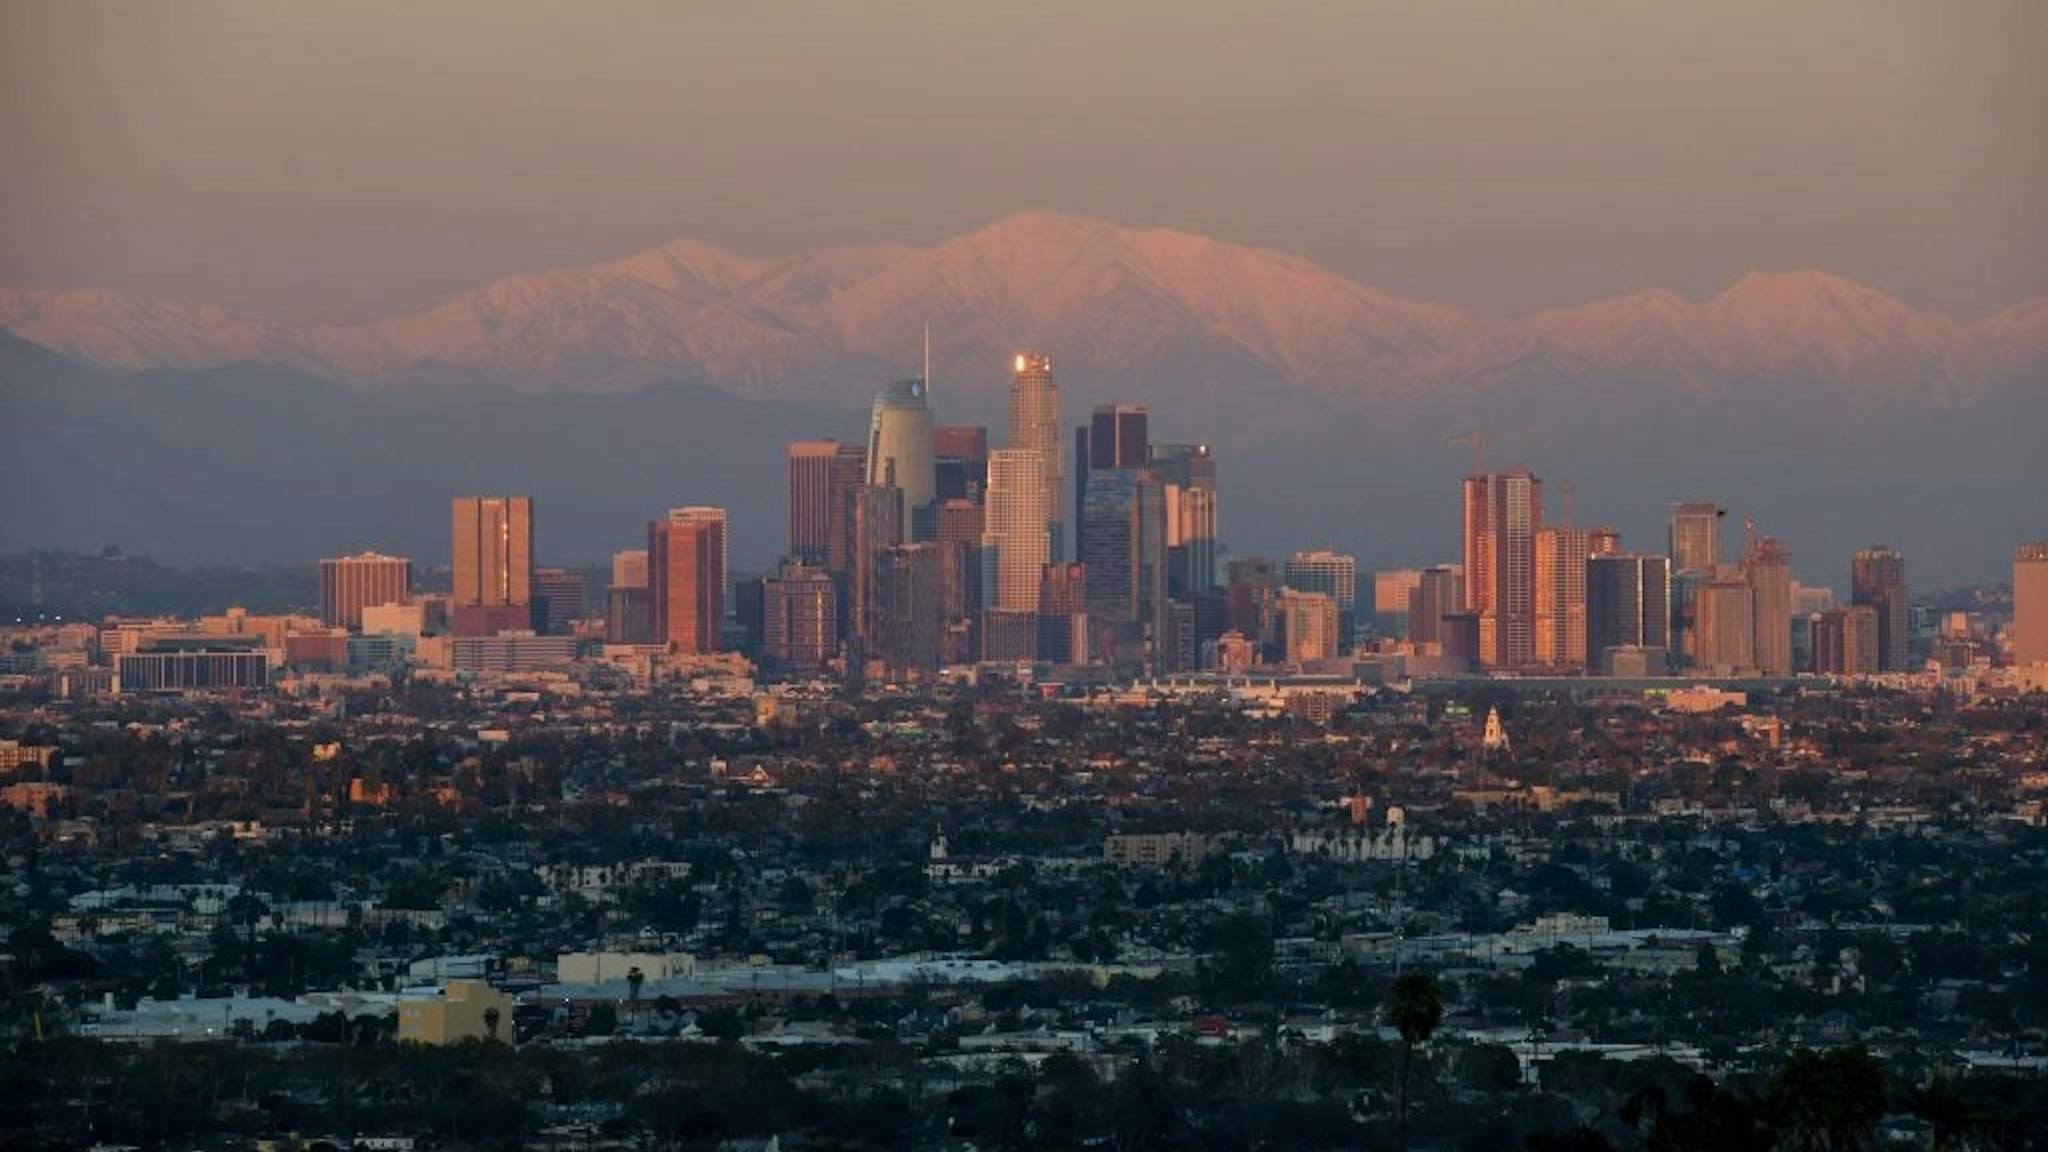 This photo shows a view of the downtown Los Angeles skyline with the snow-covered San Gabriel Mountains in the background as the sun sets on February 7, 2019.